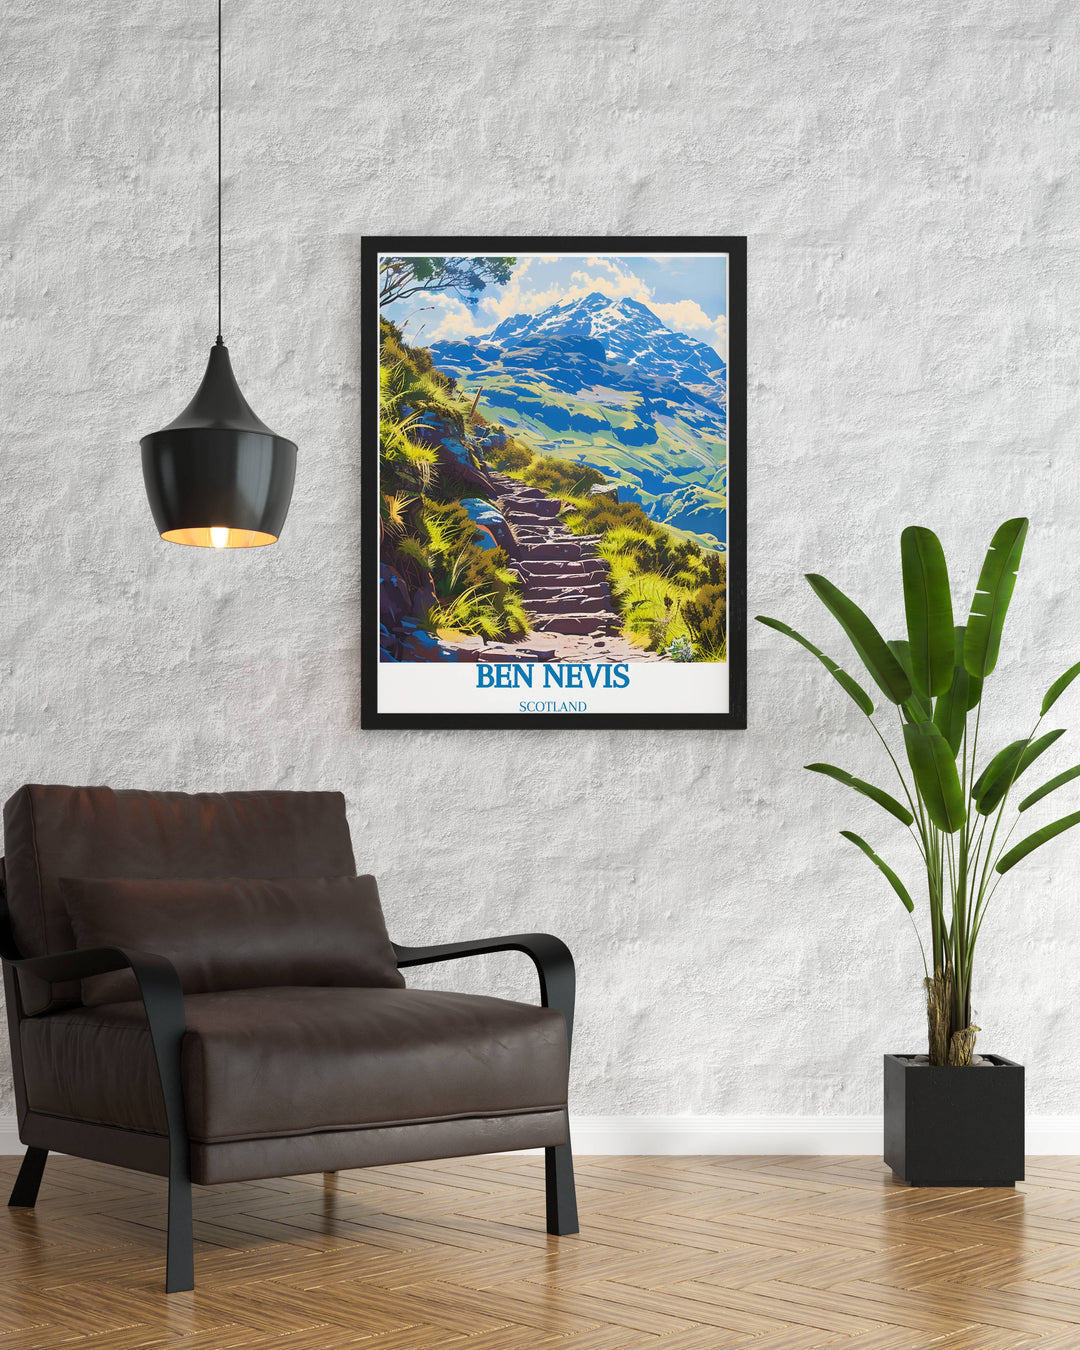 Panoramic art print of Ben Nevis Steps showing a wide view of the mountain and the trail carved into the Scottish landscape